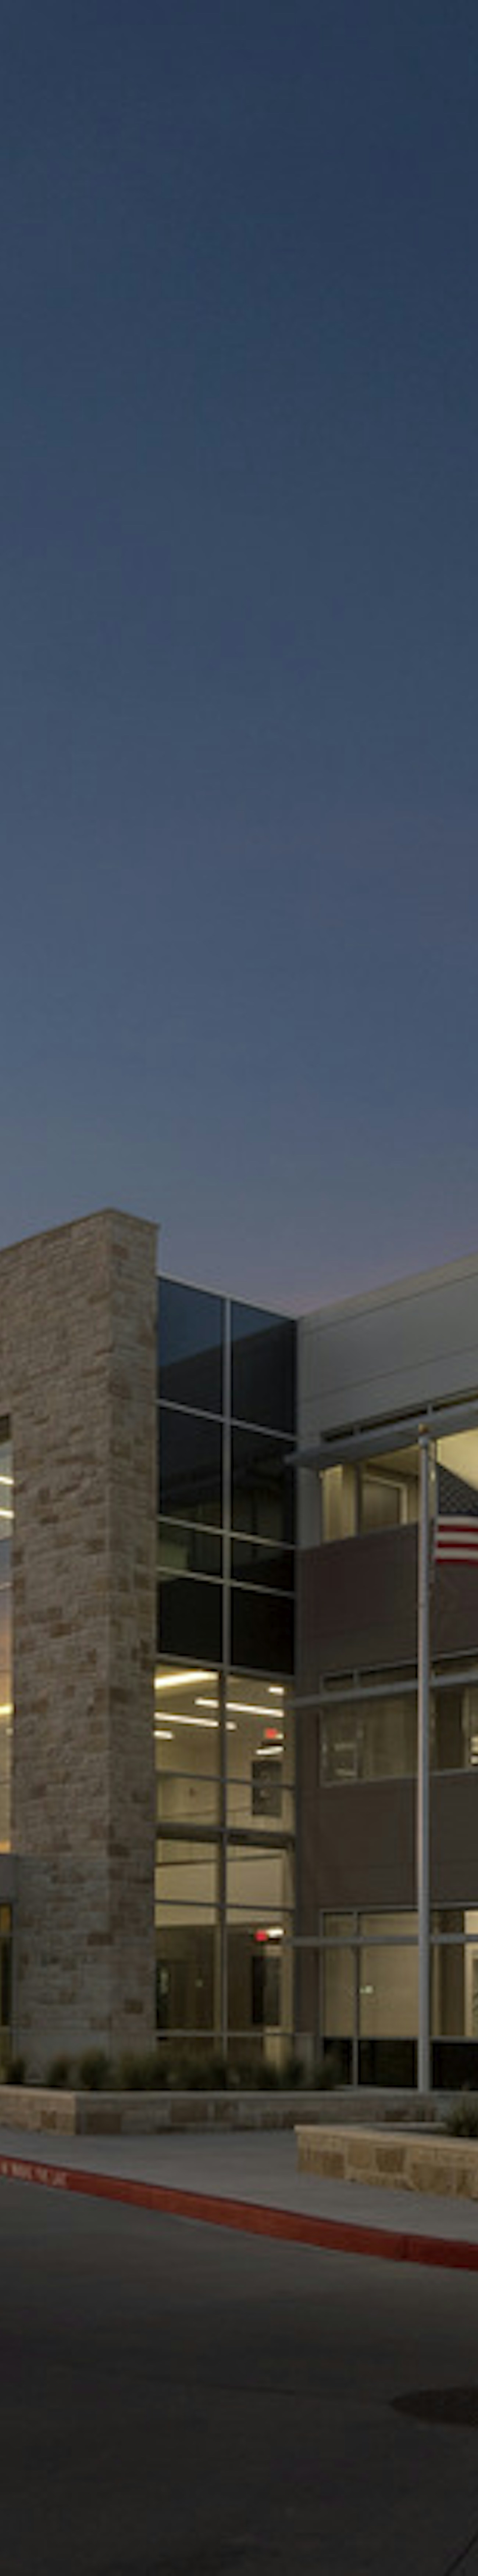                         Natural Gas Services Group Corporate Headquarters
                    